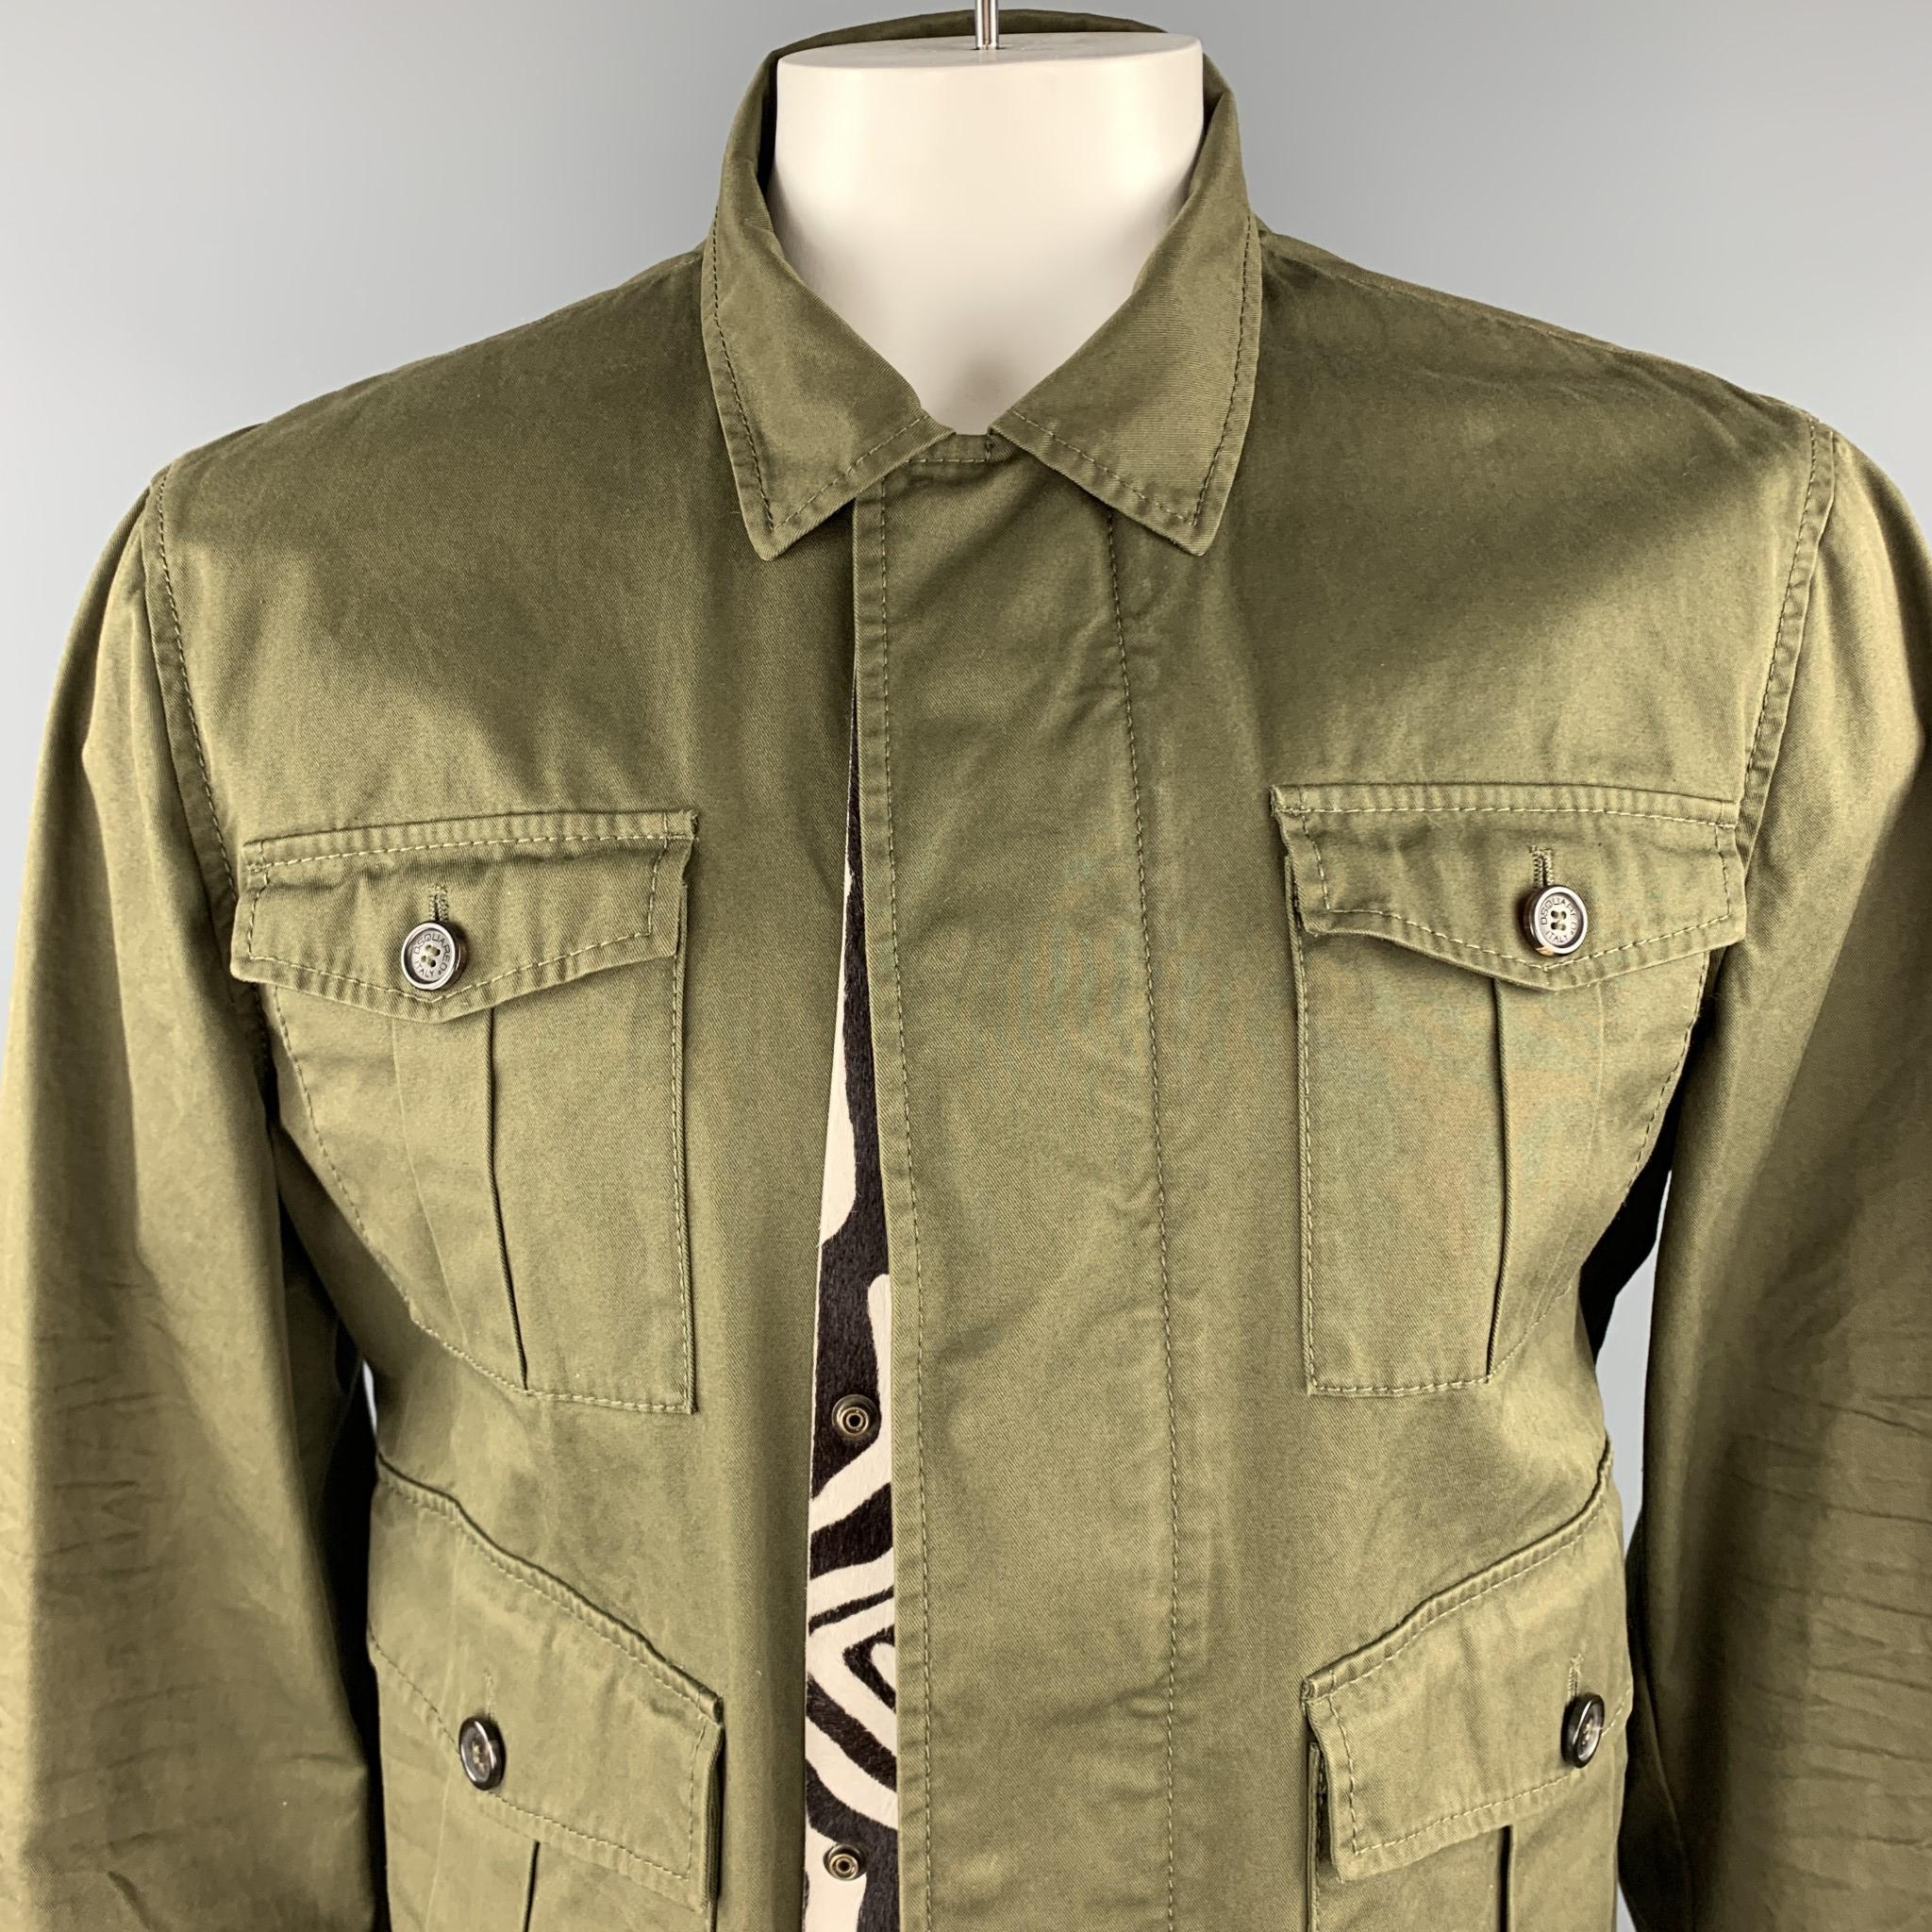 DSQUARED2 army style jacket comes in olive cotton with patch flap pockets, raw frayed hem, and zip front with zebra pony hair leather trimmed snap placket. Made in Italy.

Excellent Pre-Owned Condition.
Marked: IT 54

Measurements:

Shoulder: 19